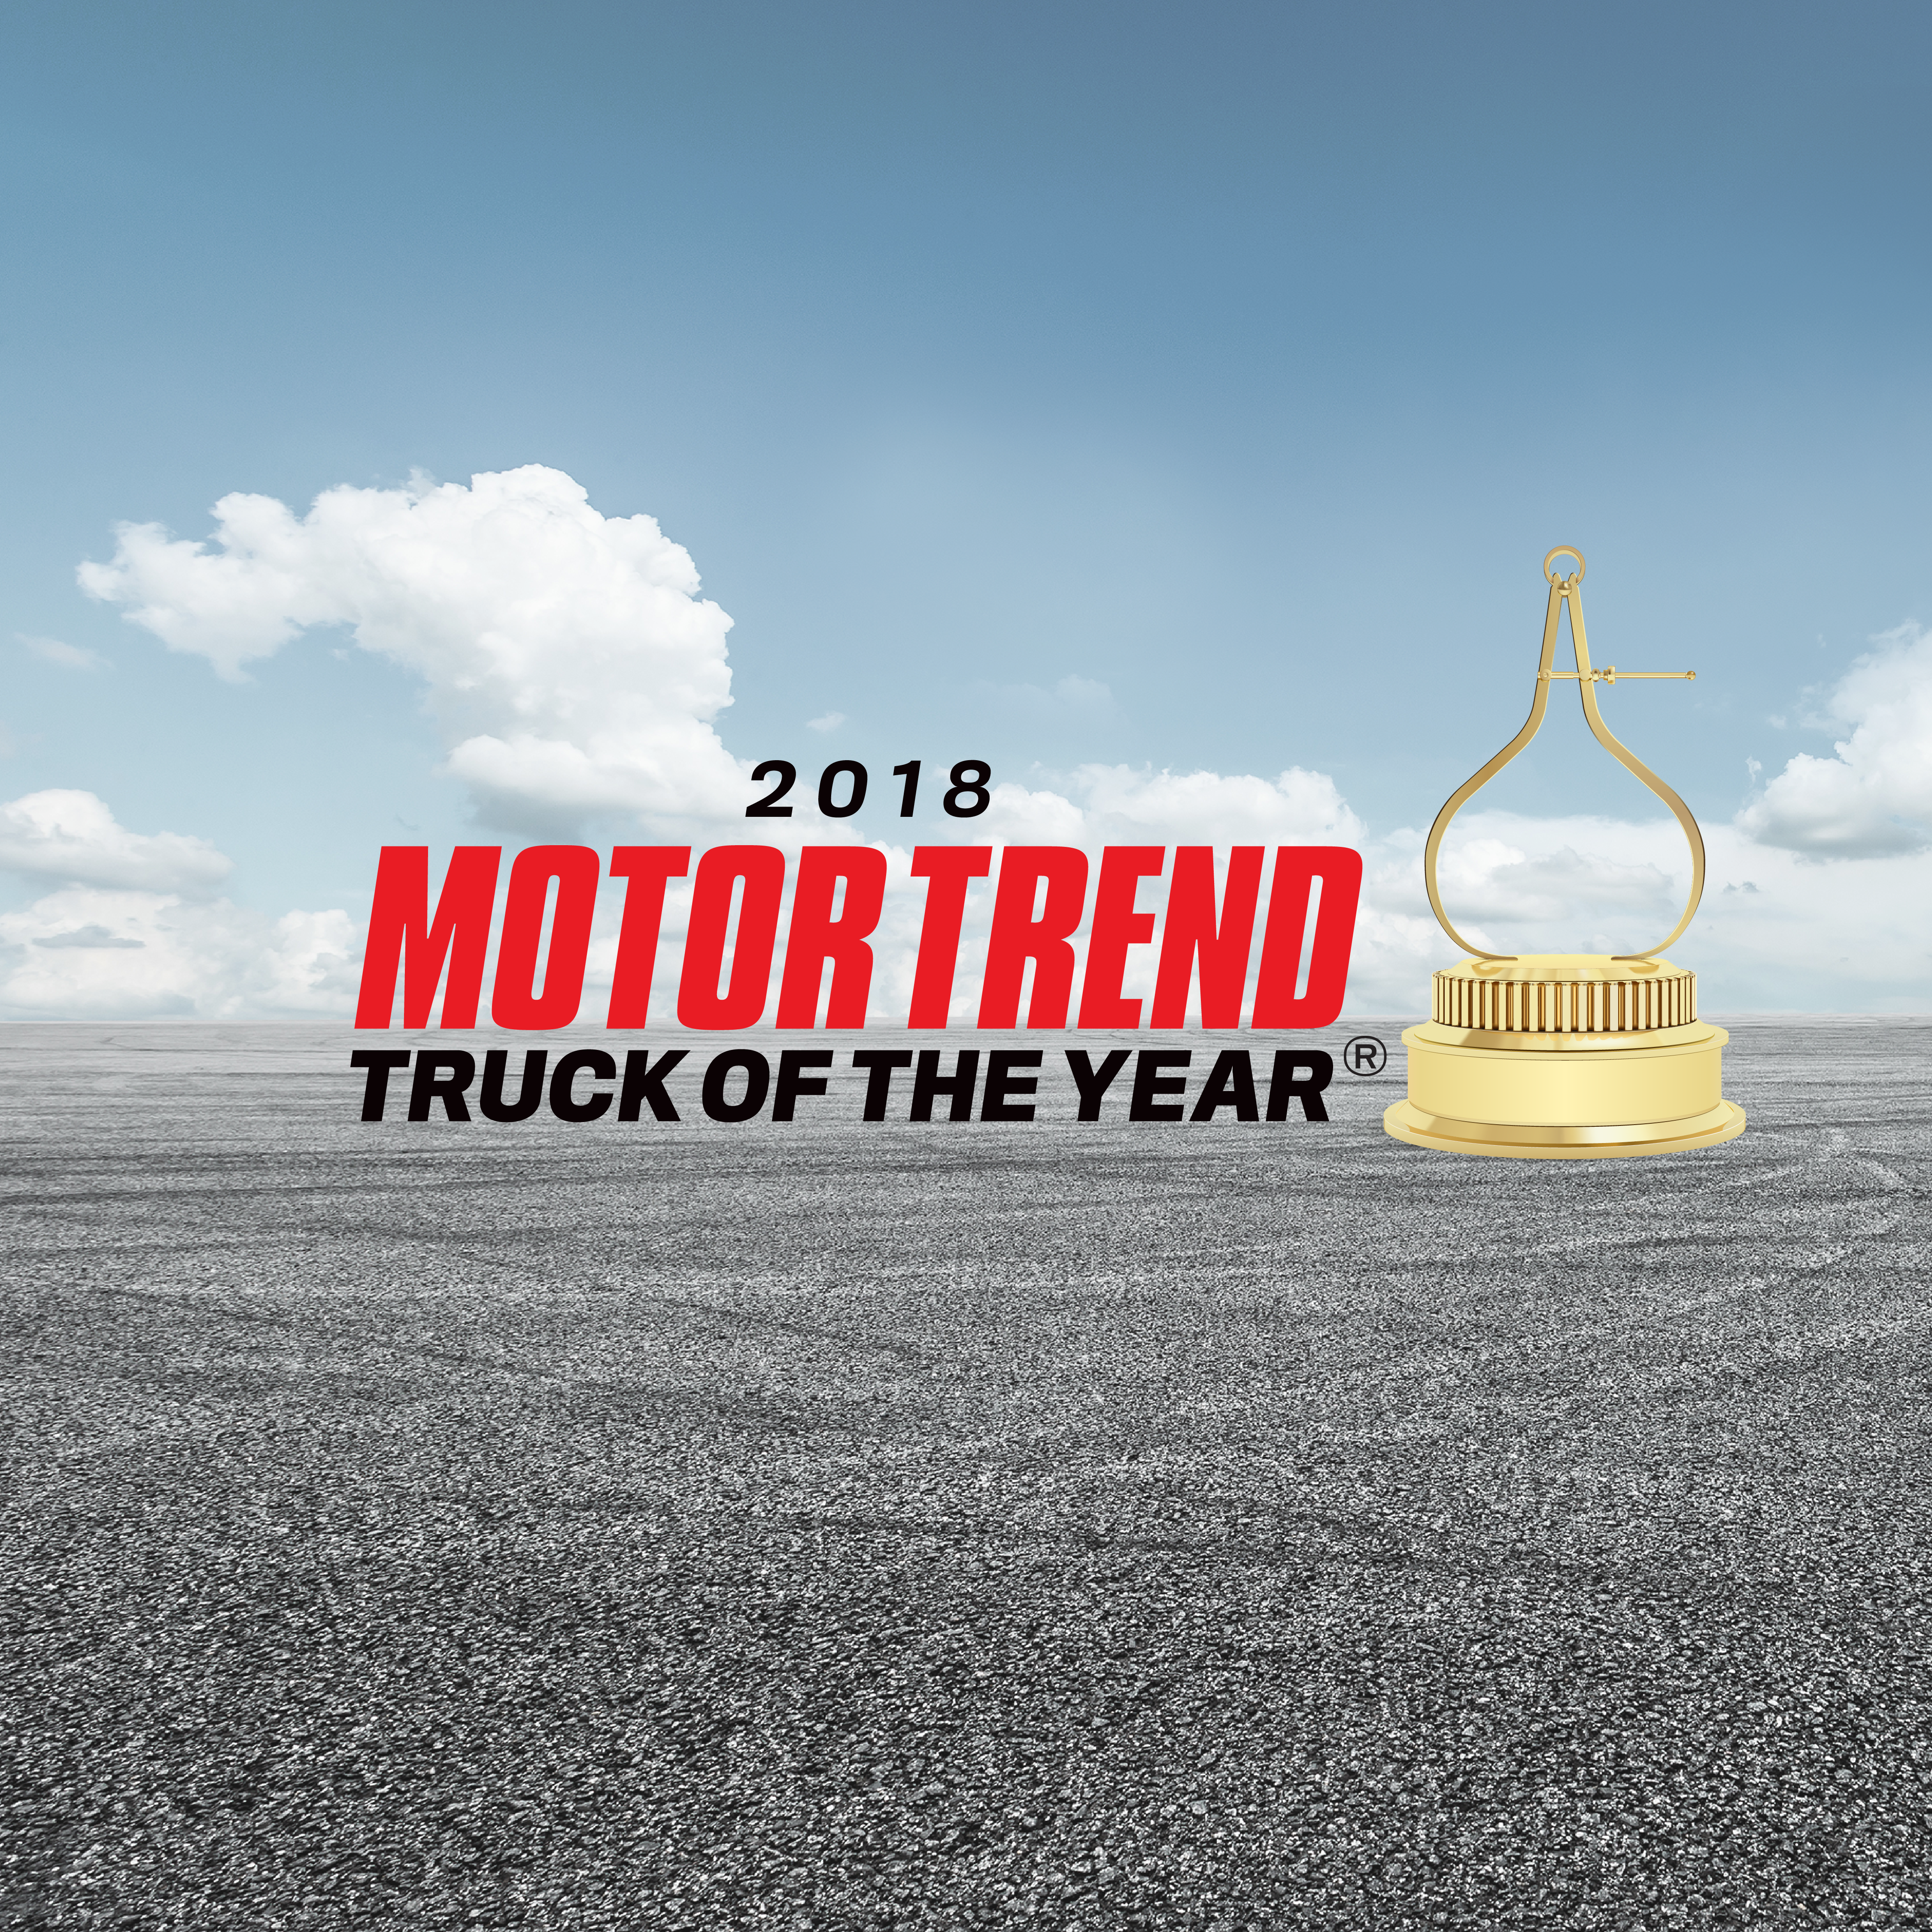 The 2018 Truck of the Year